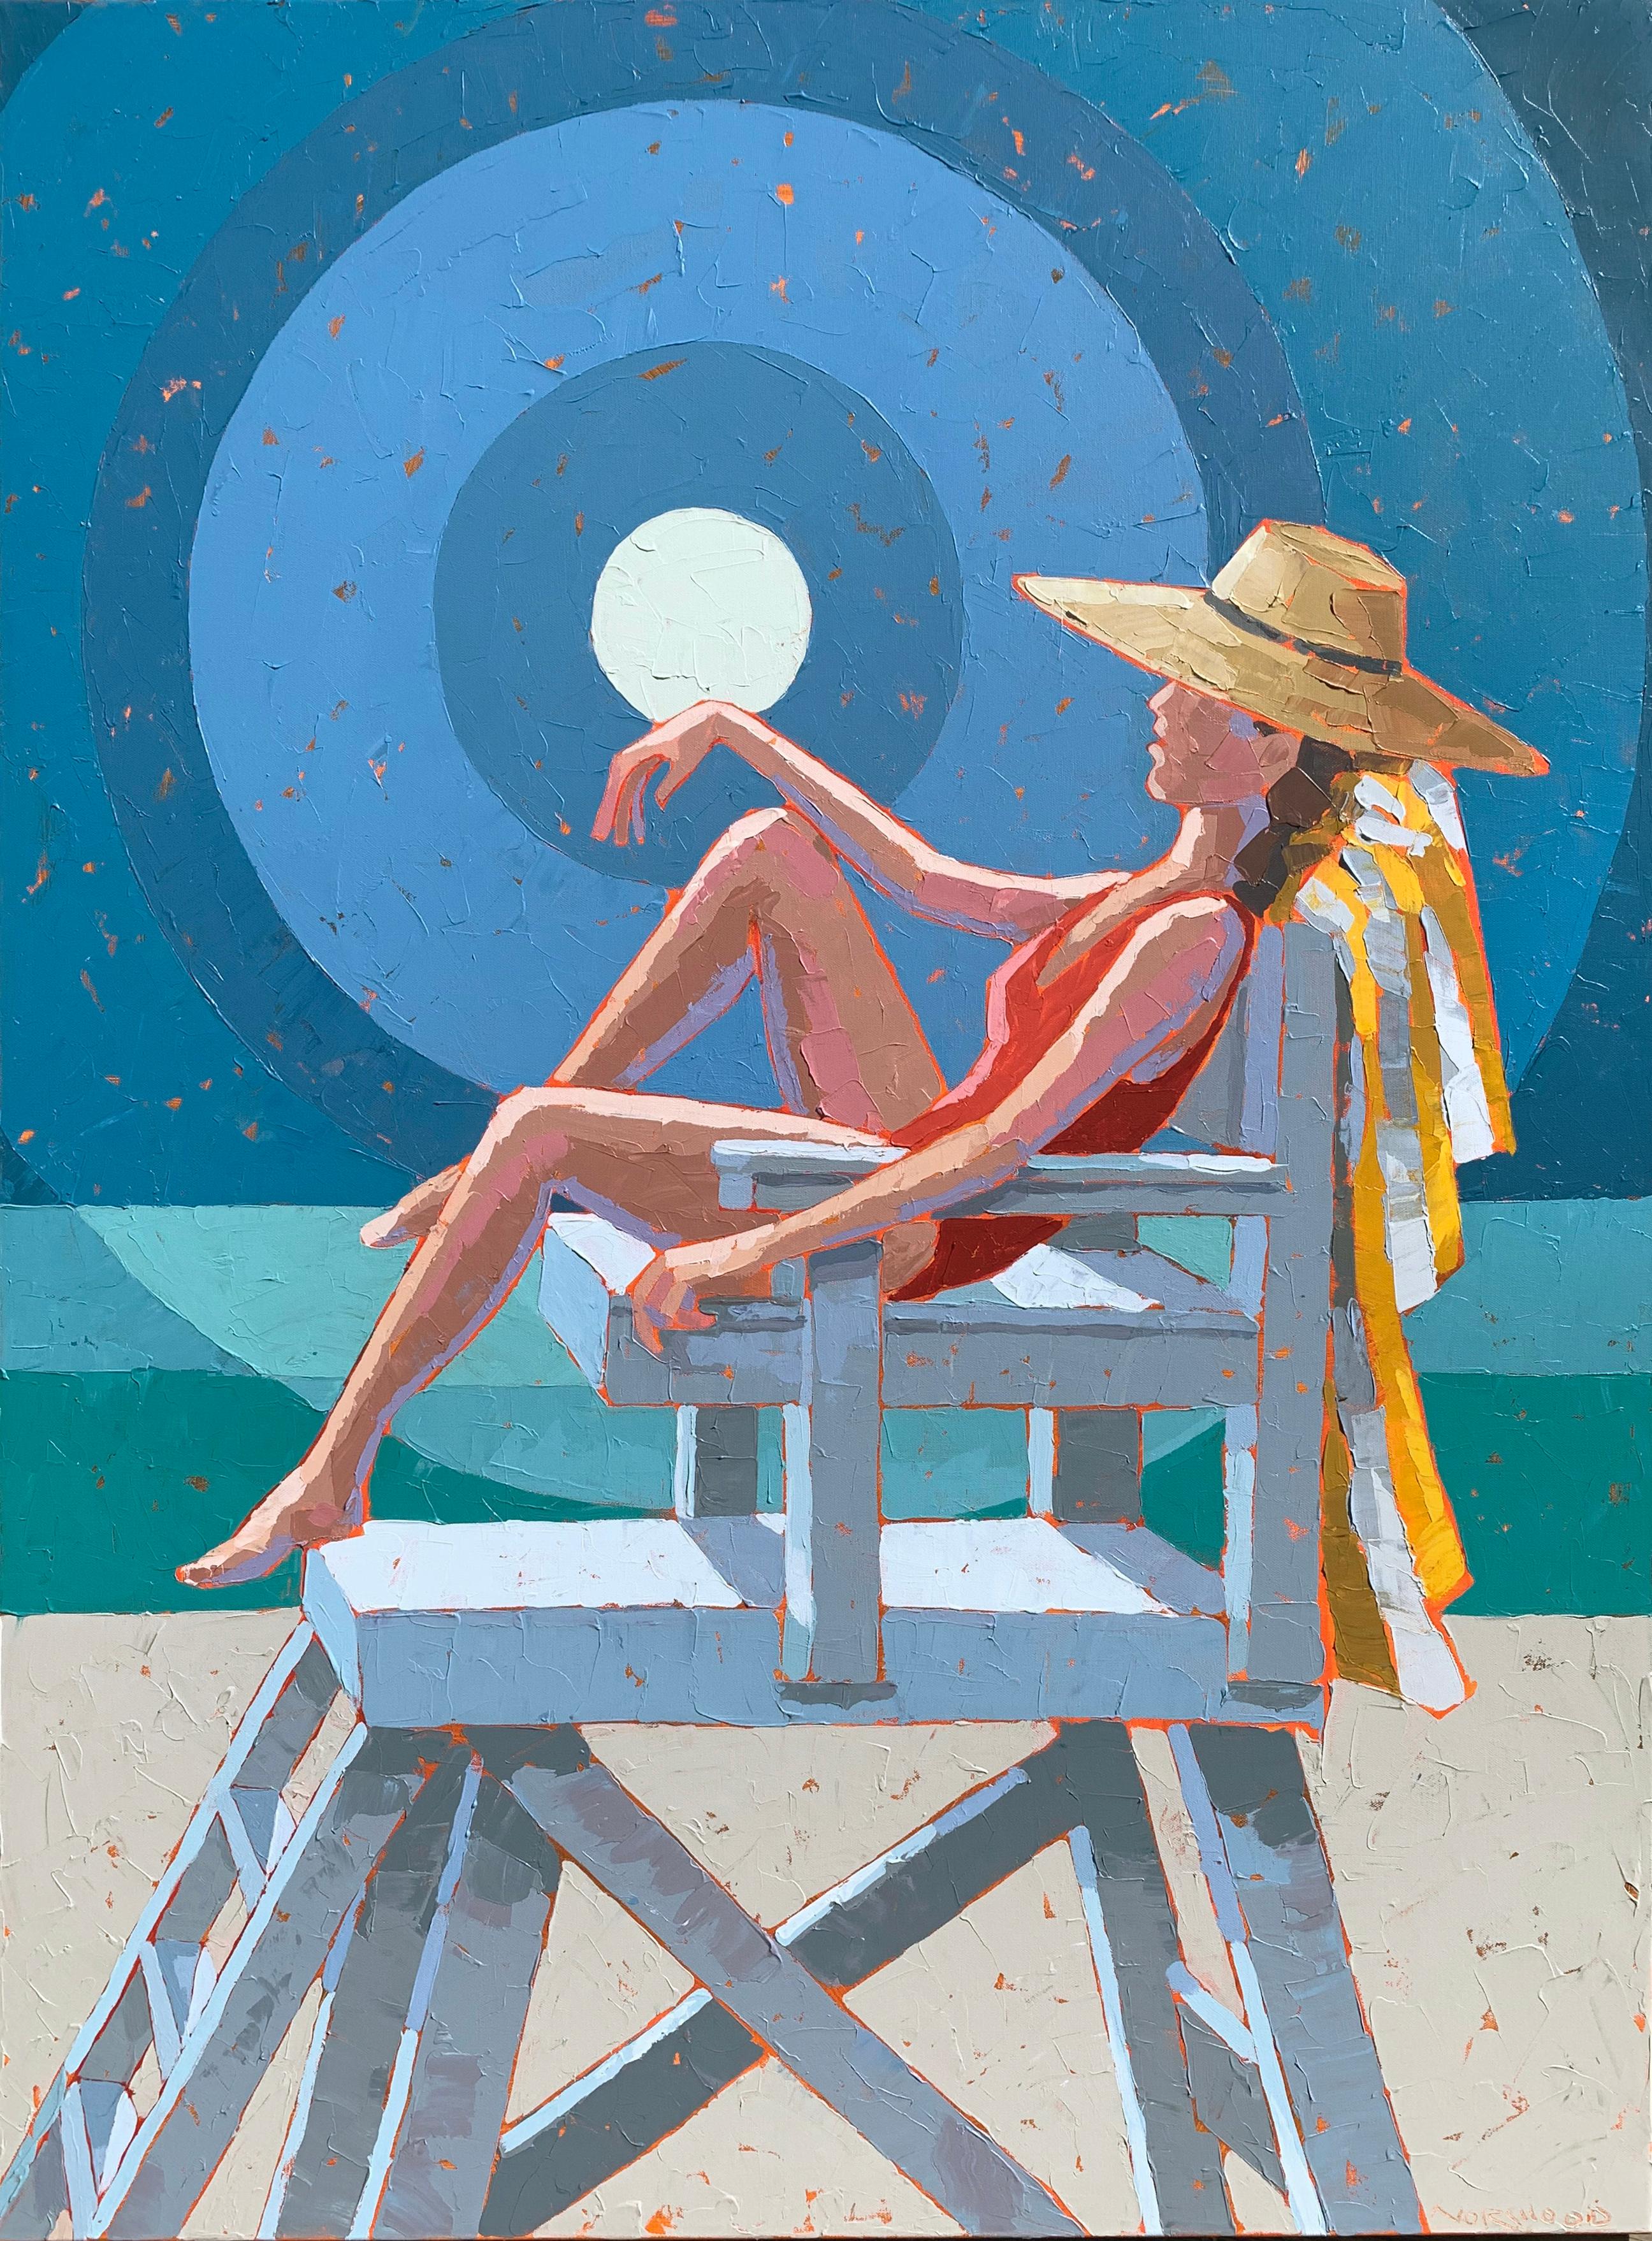 Paul Norwood Figurative Painting - "Keeping Watch" acrylic painting of a woman in a red swimsuit on a beach chair